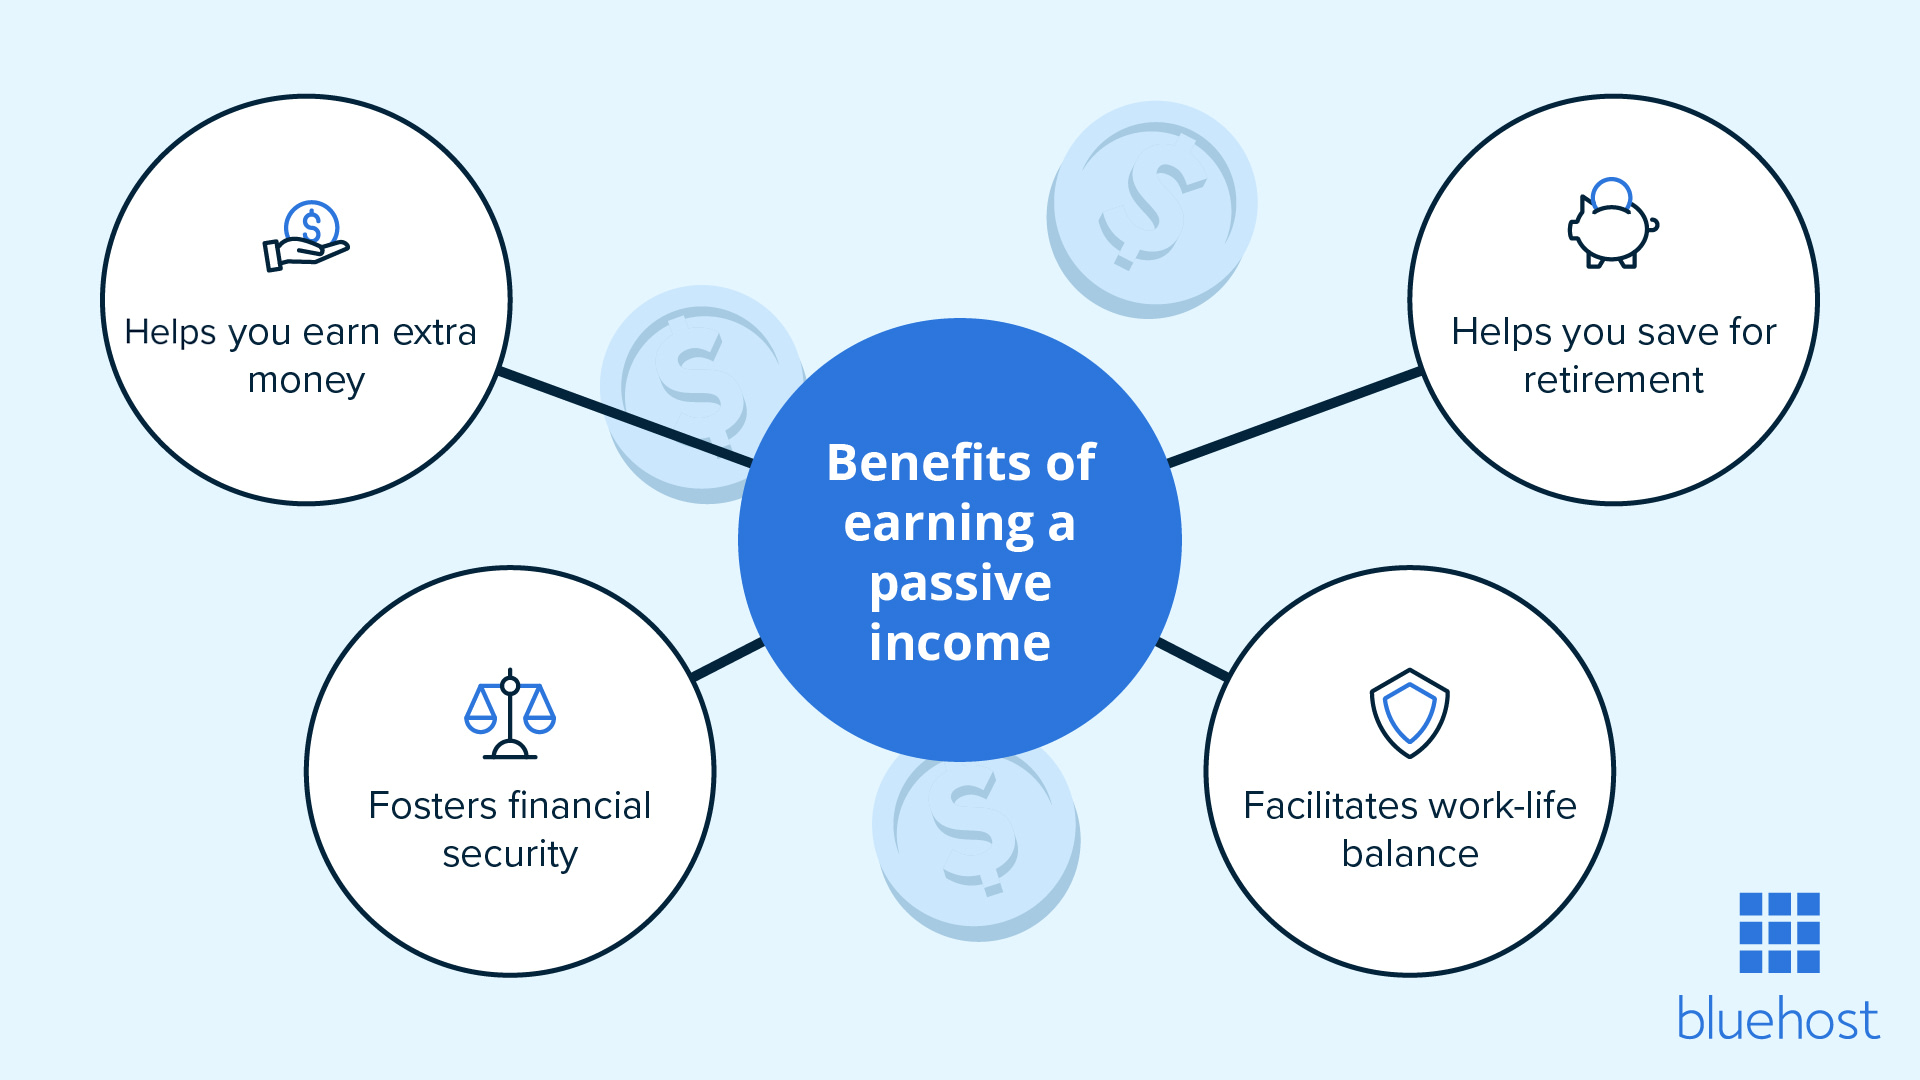 Four benefits of earning a passive income.